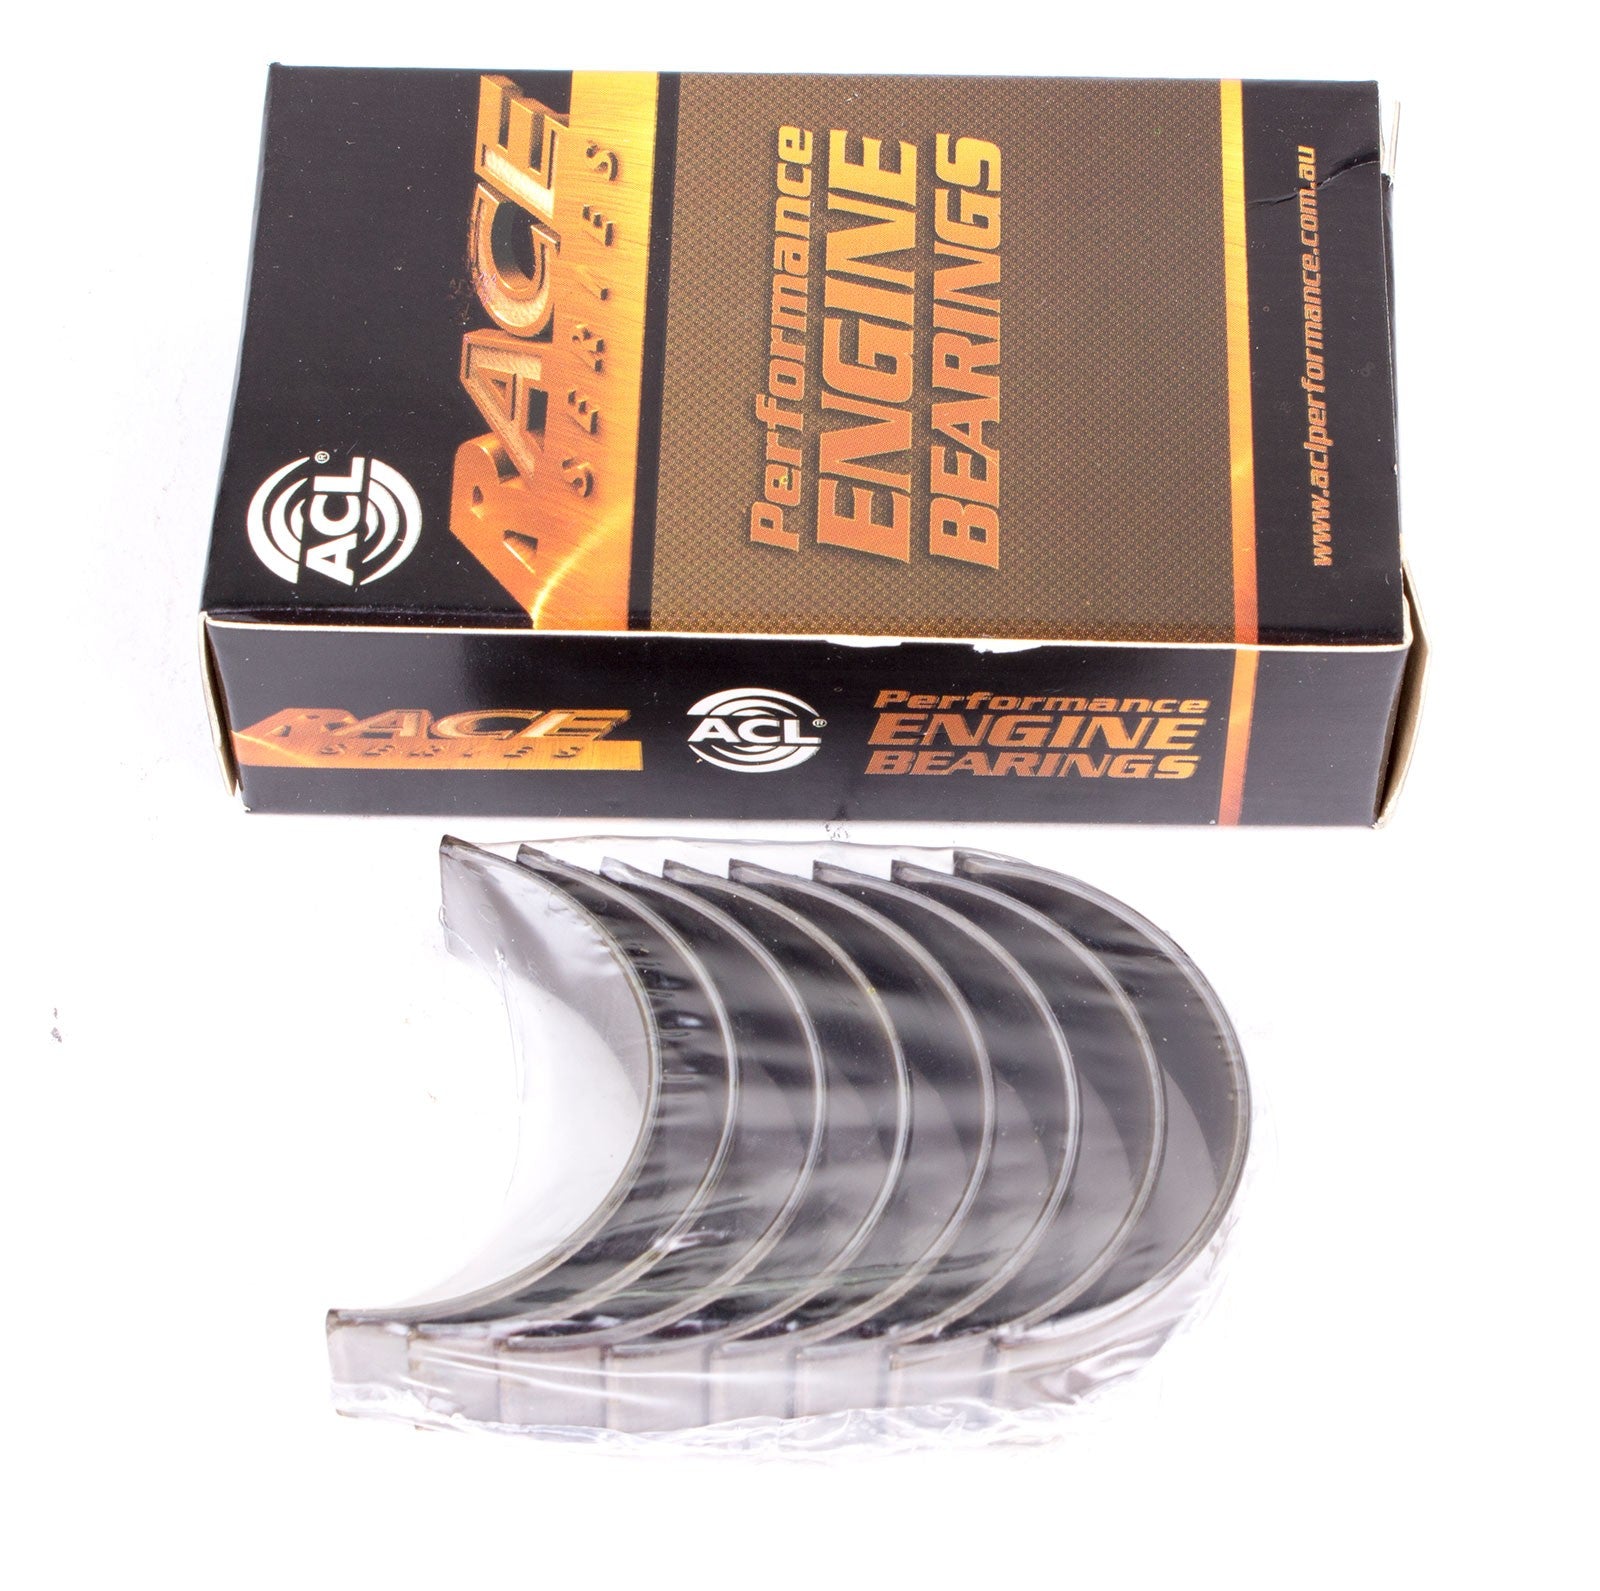 ACL 5M429H-010 Main bearing set (ACL Race Series) Photo-0 